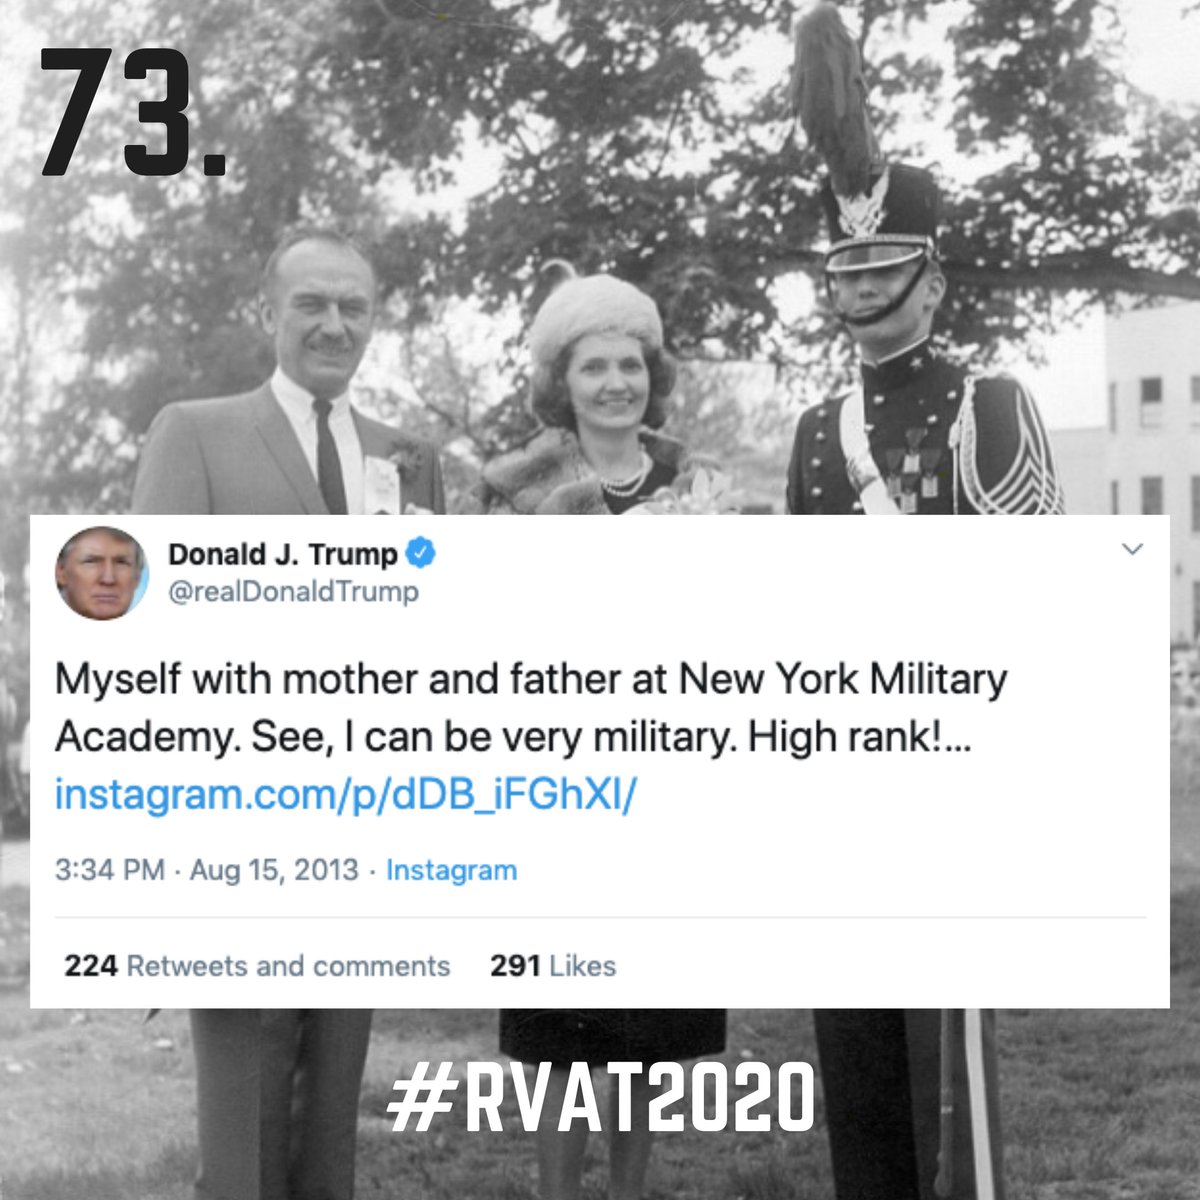 73. "See, I can be very military."Hilarious phrasing aside, the only reason you found yourself in any kind of uniform is because your parents shelled out the big bucks.Kinda like your "success" in real estate.